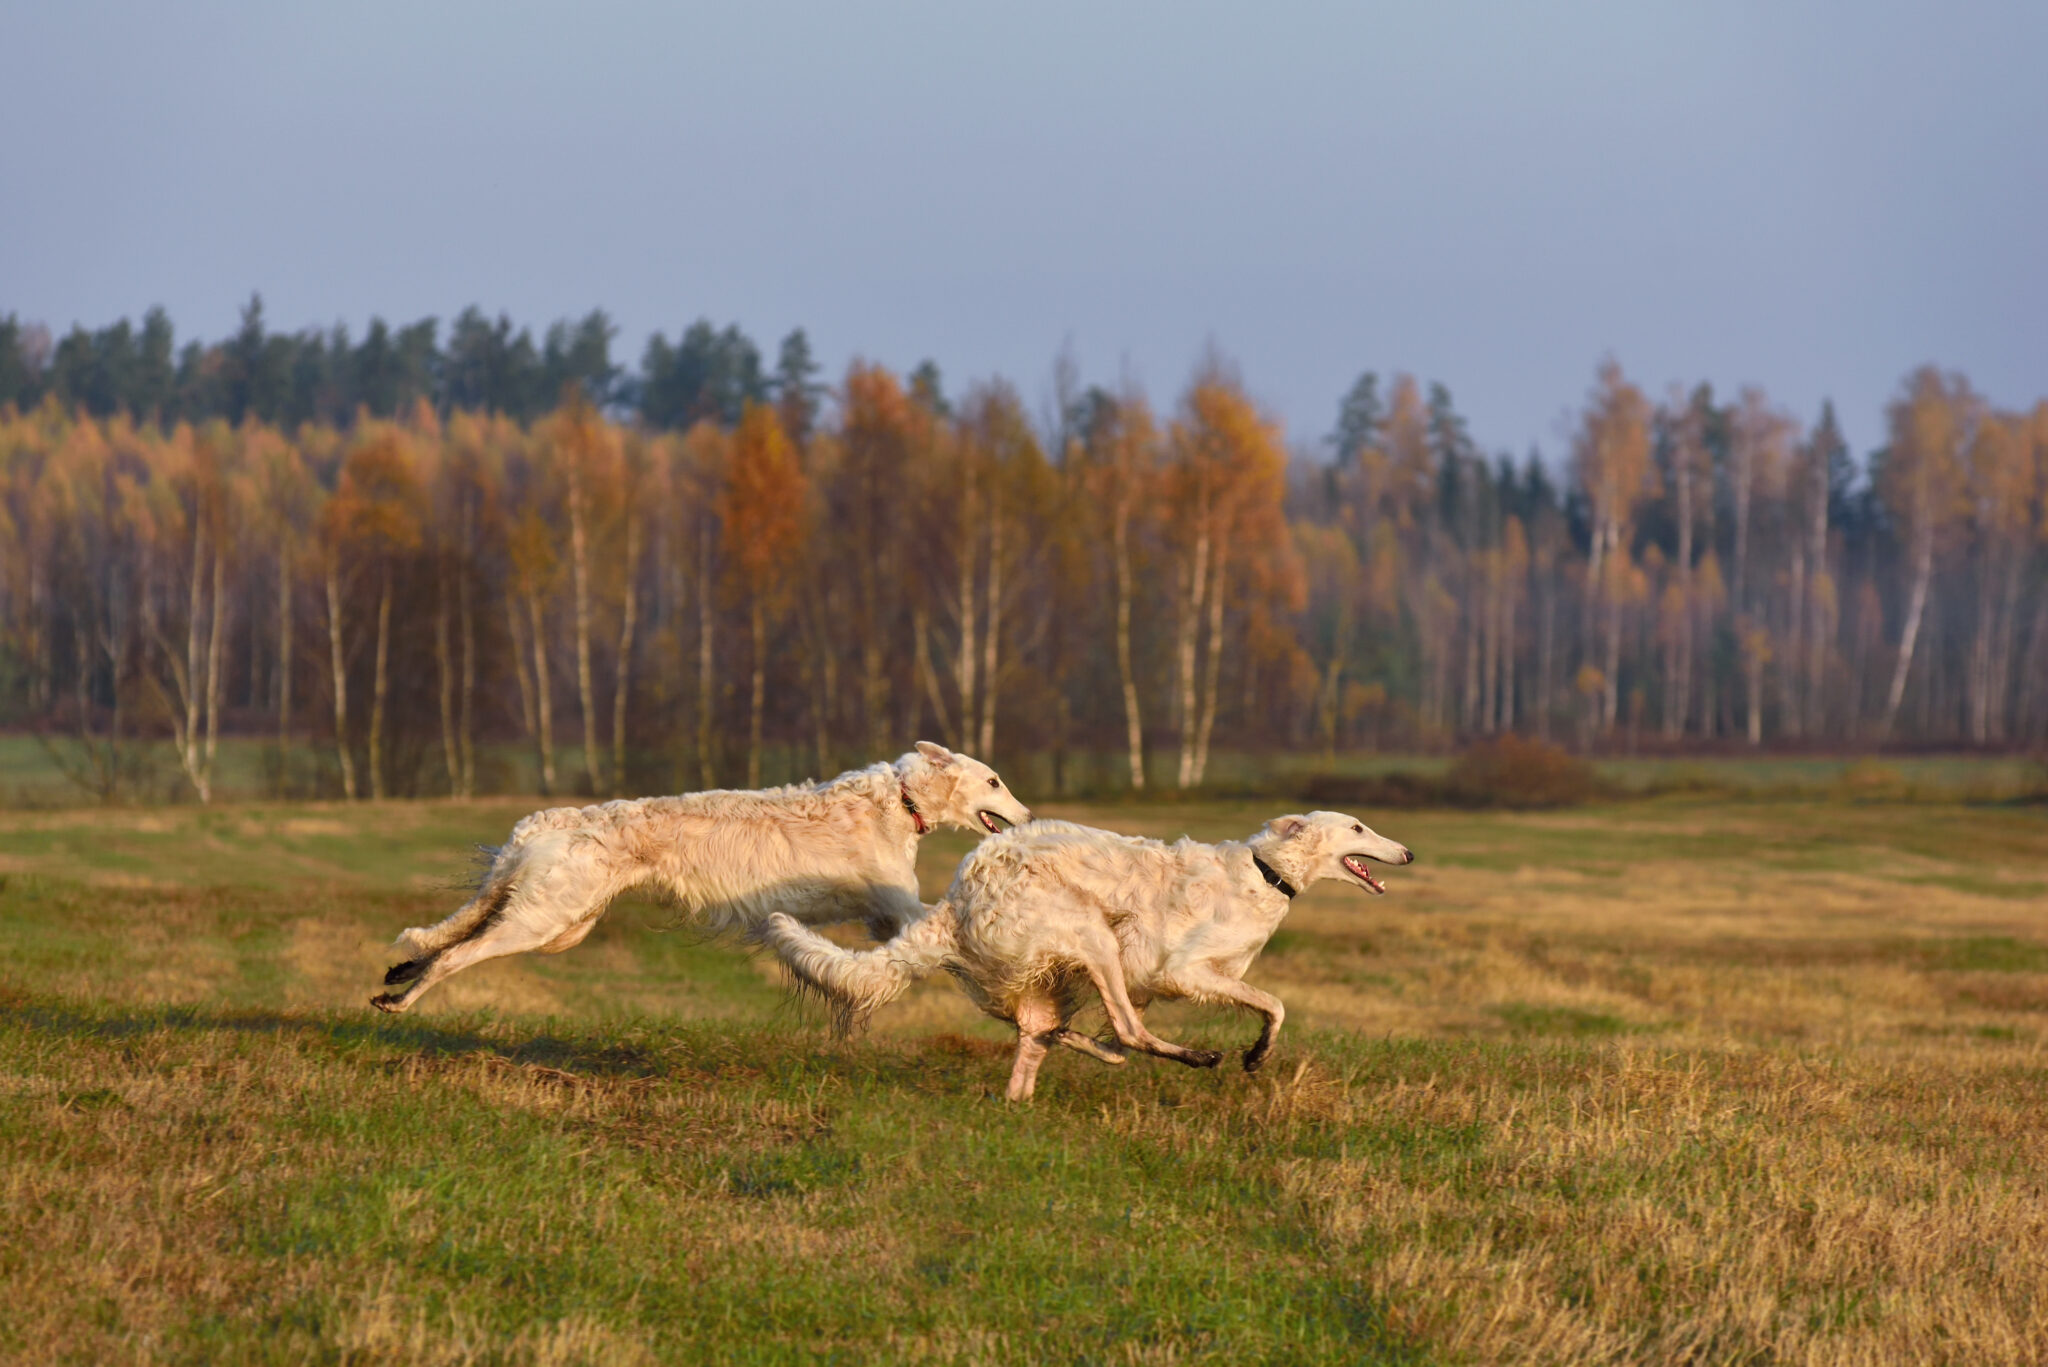 15 Of The Fastest Dog Breeds In The World